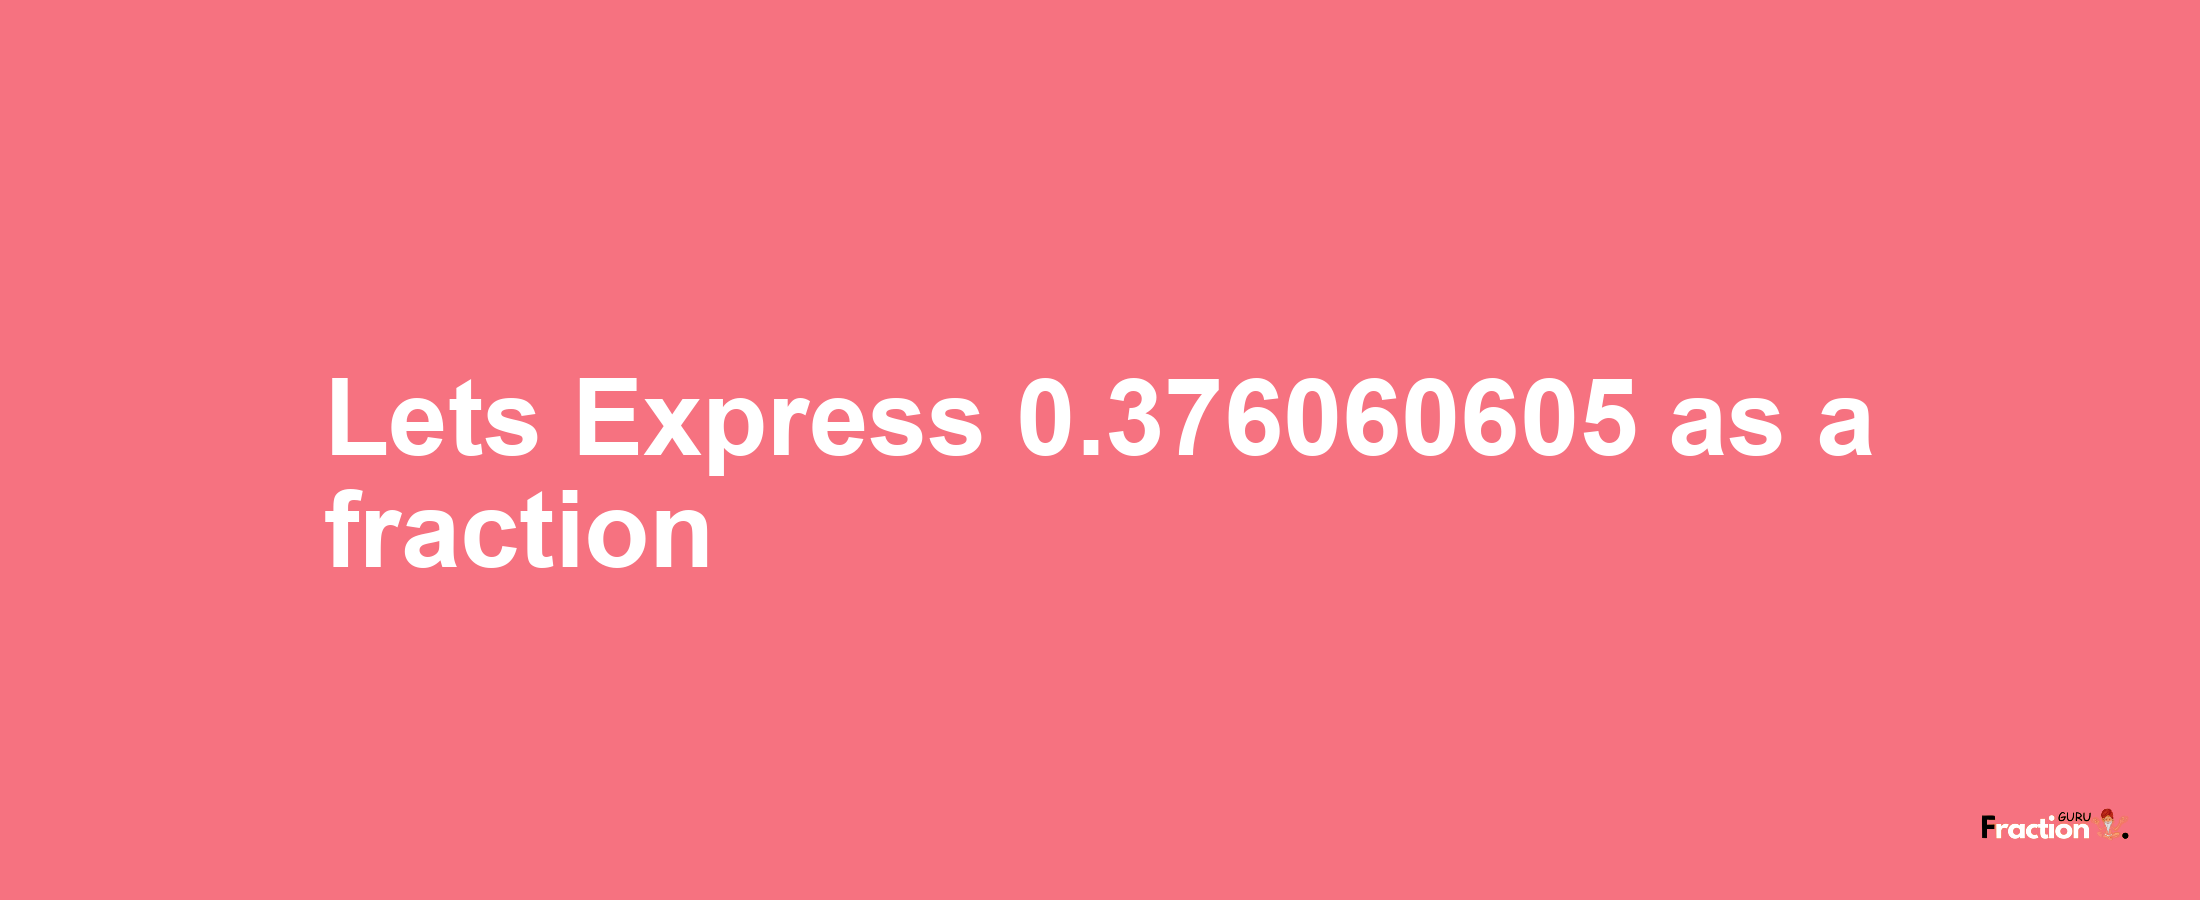 Lets Express 0.376060605 as afraction